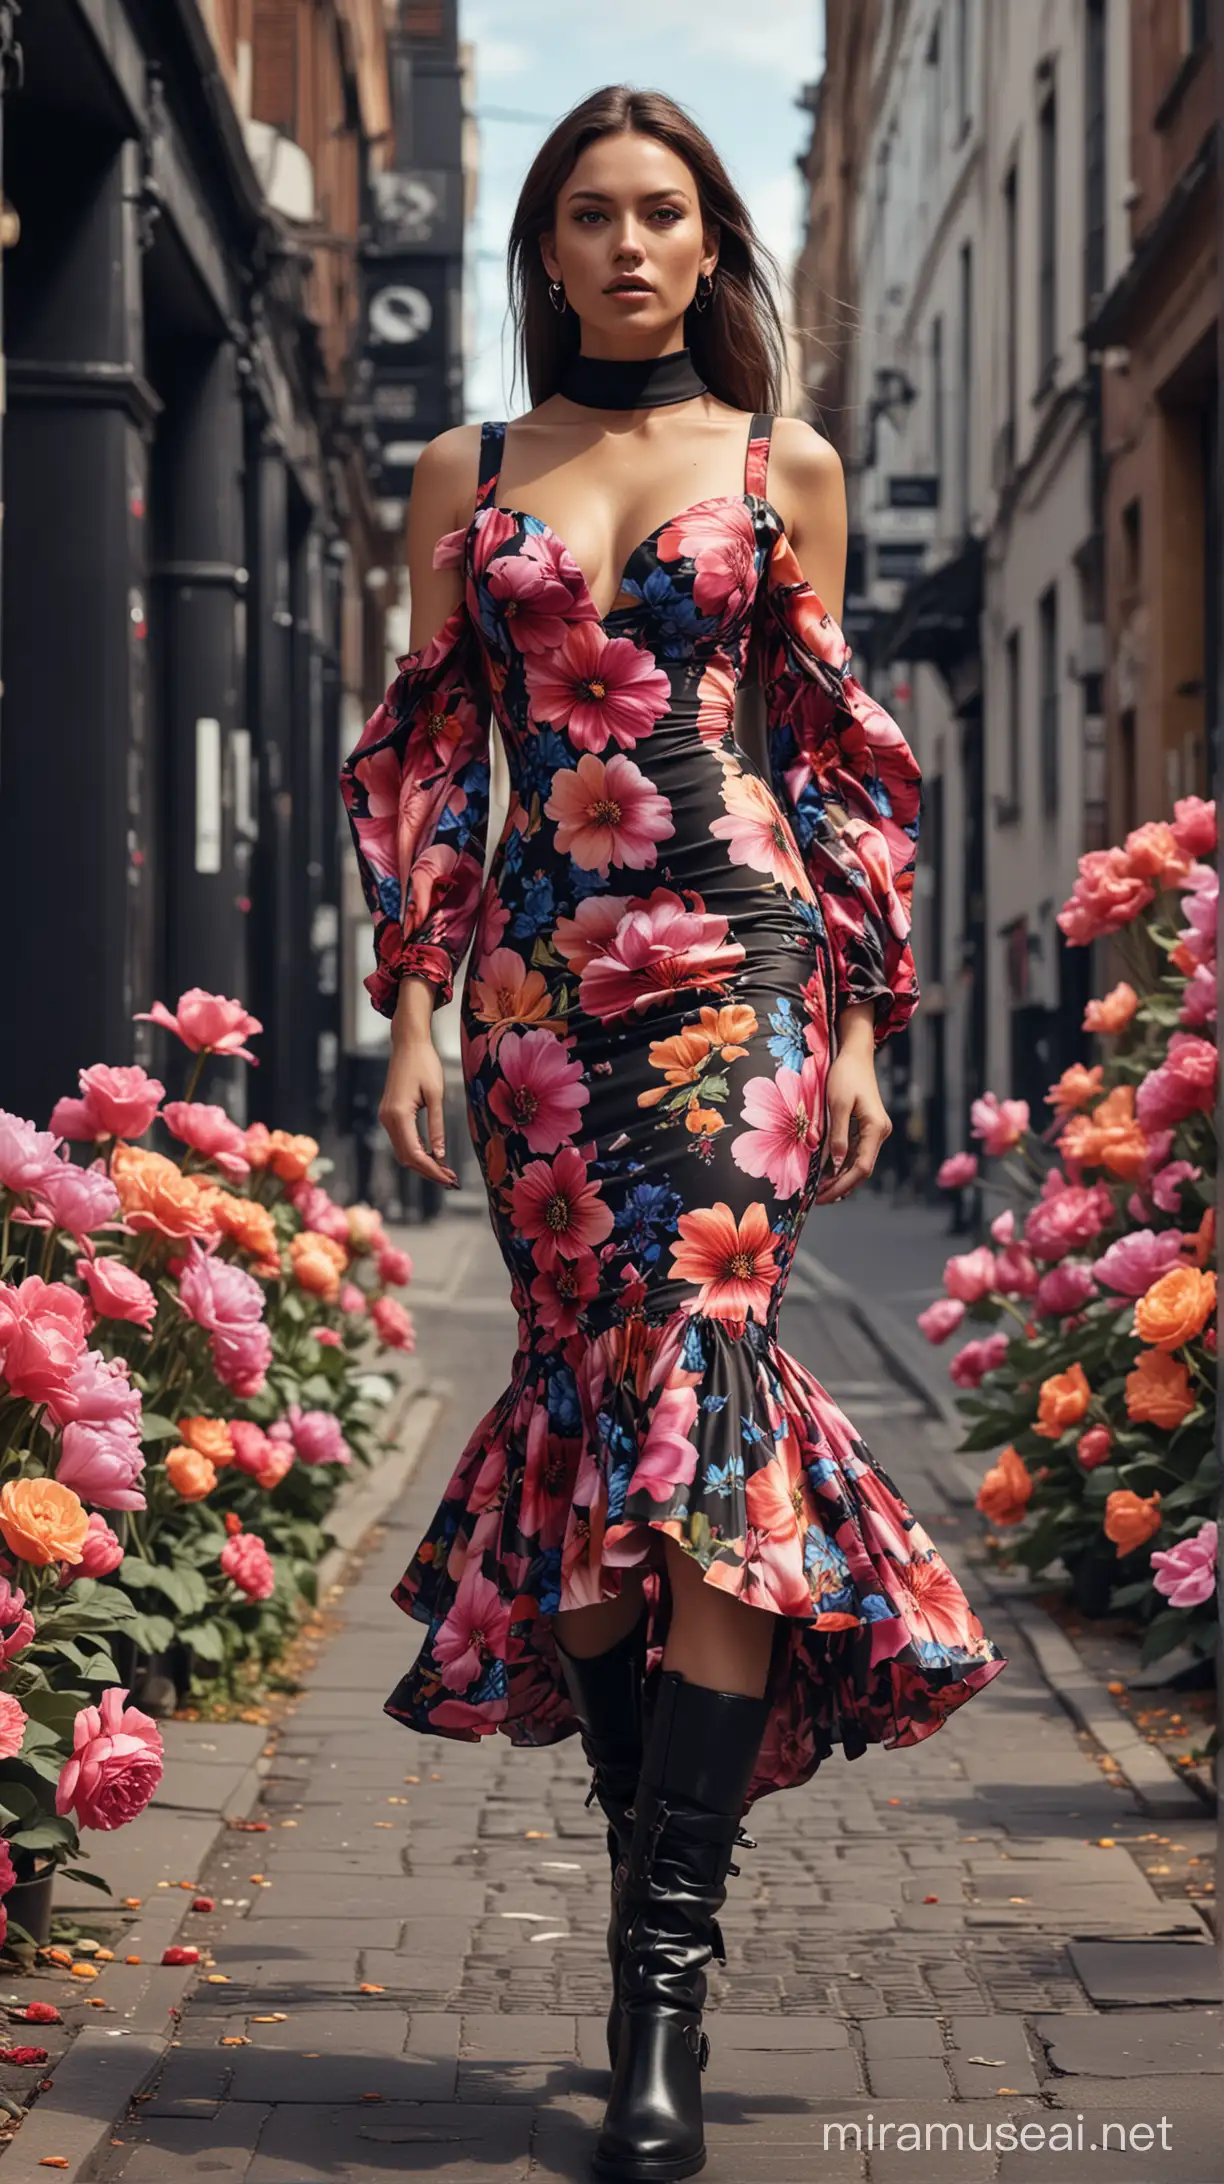 Glamorous Supermodel in Oversized Flower Dress and Punk Boots on Urban Street